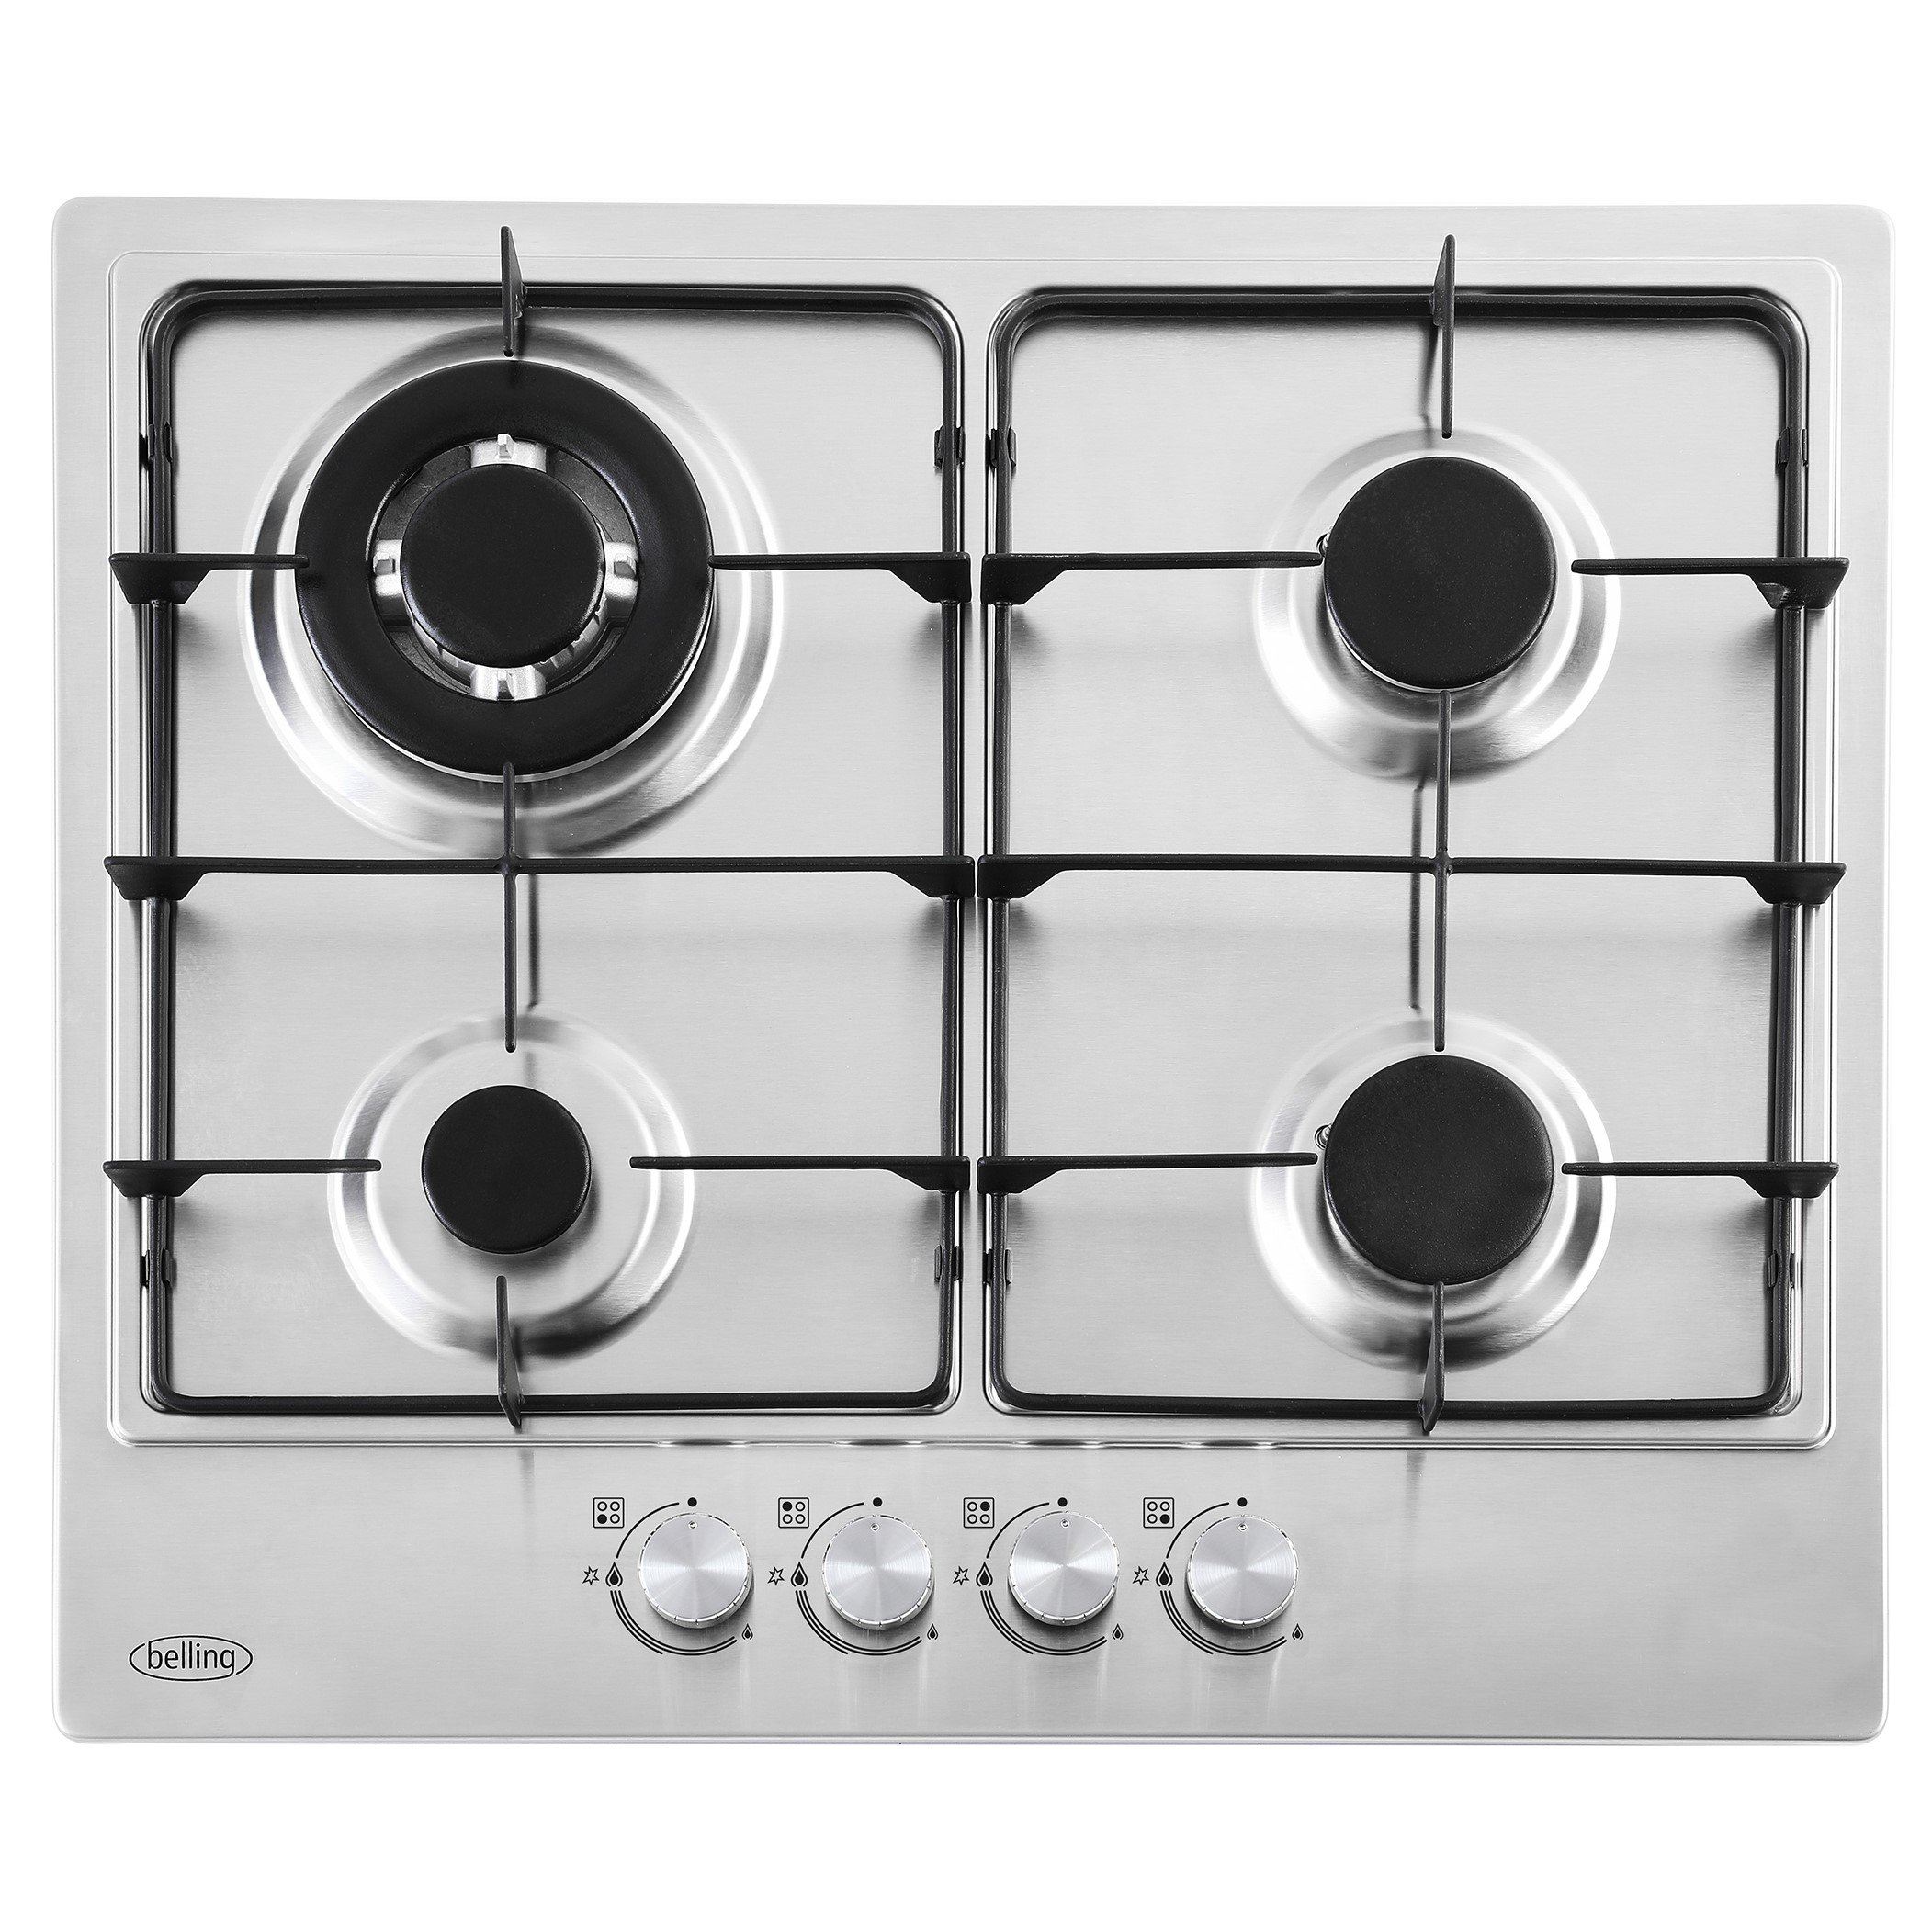 60cm stainless steel gas hob with powerful 3.6kW wok burner and ribbon iron pan supports